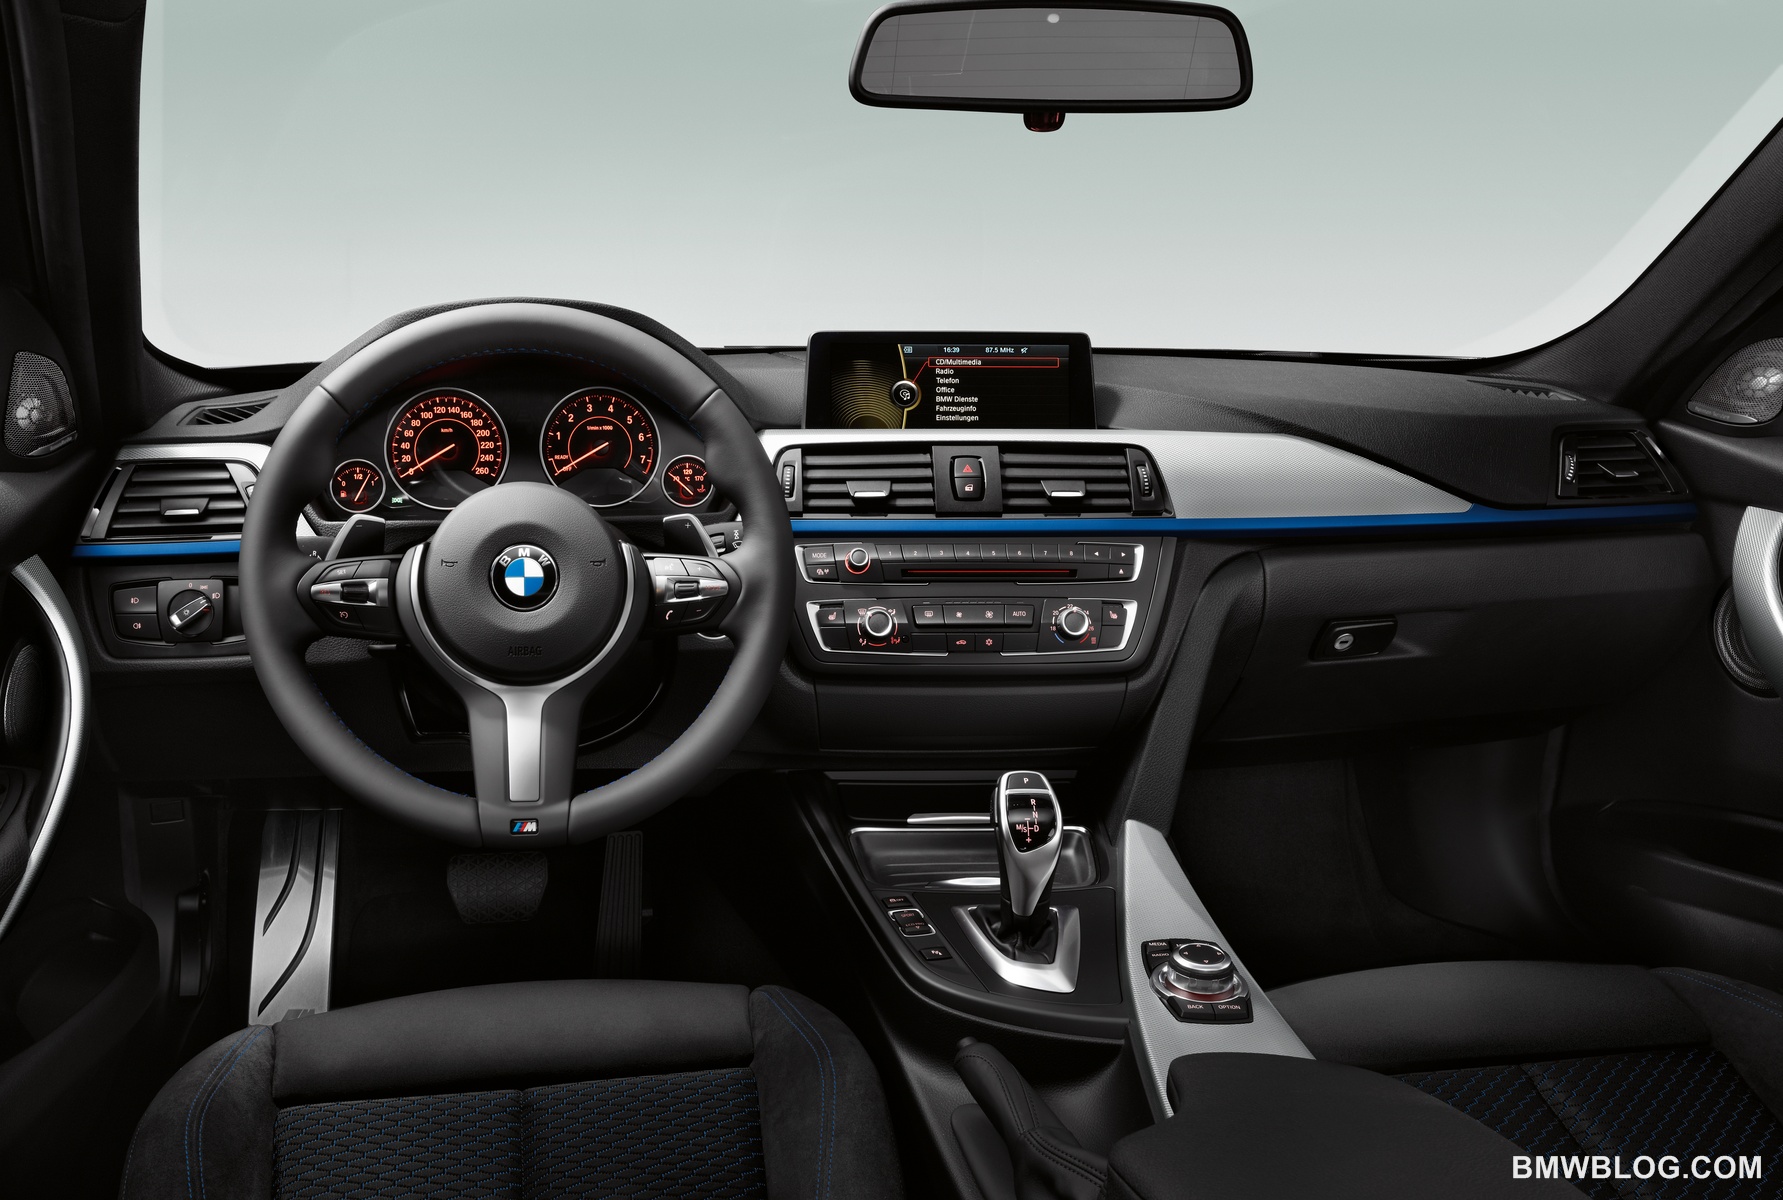 Inside, the new BMW 3 Series combines luxury with sportiness and different